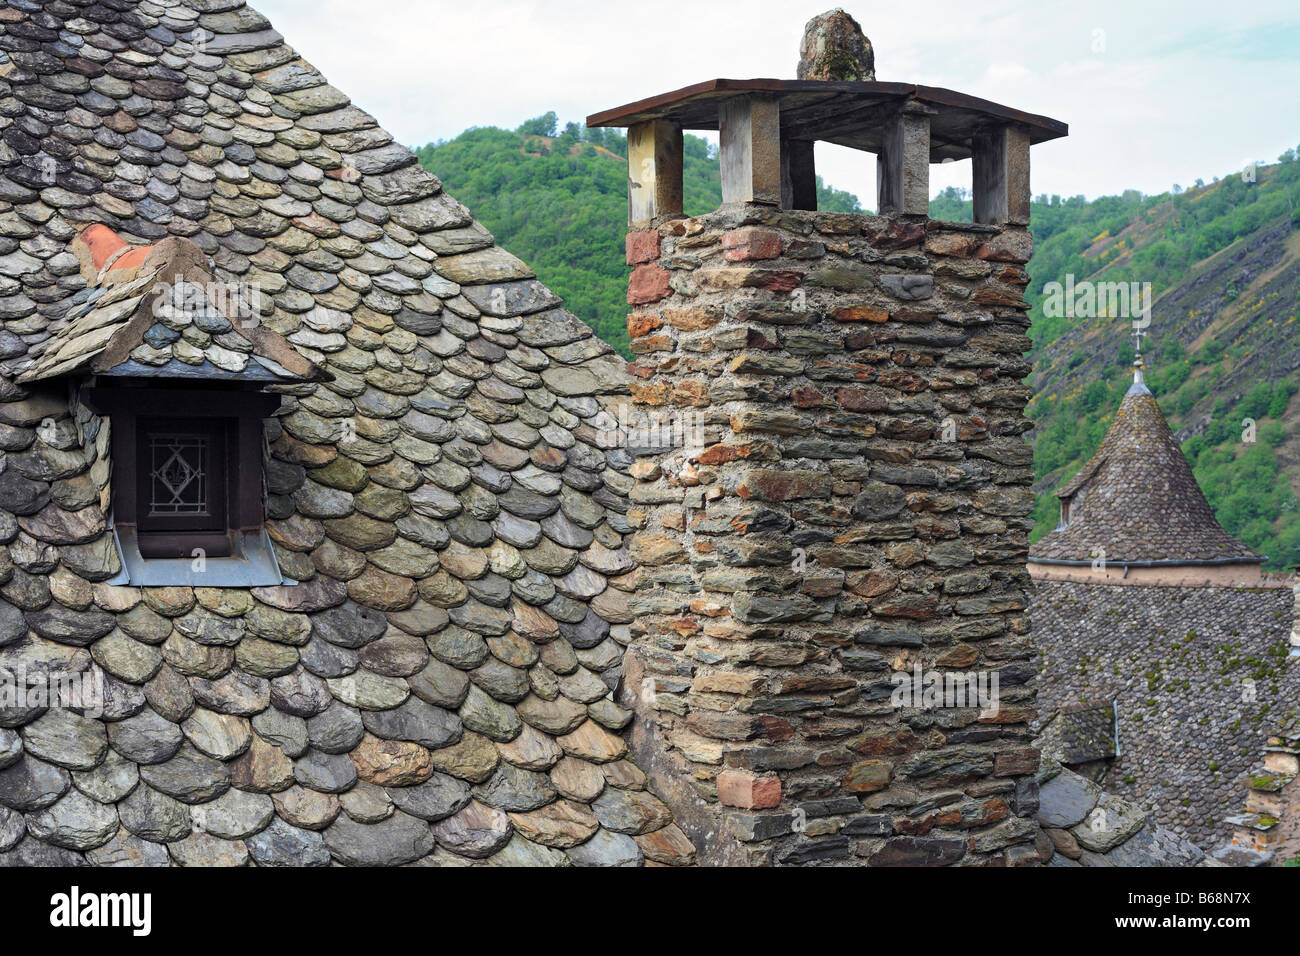 City architecture, country house with traditional slate roof, Conques, France Stock Photo